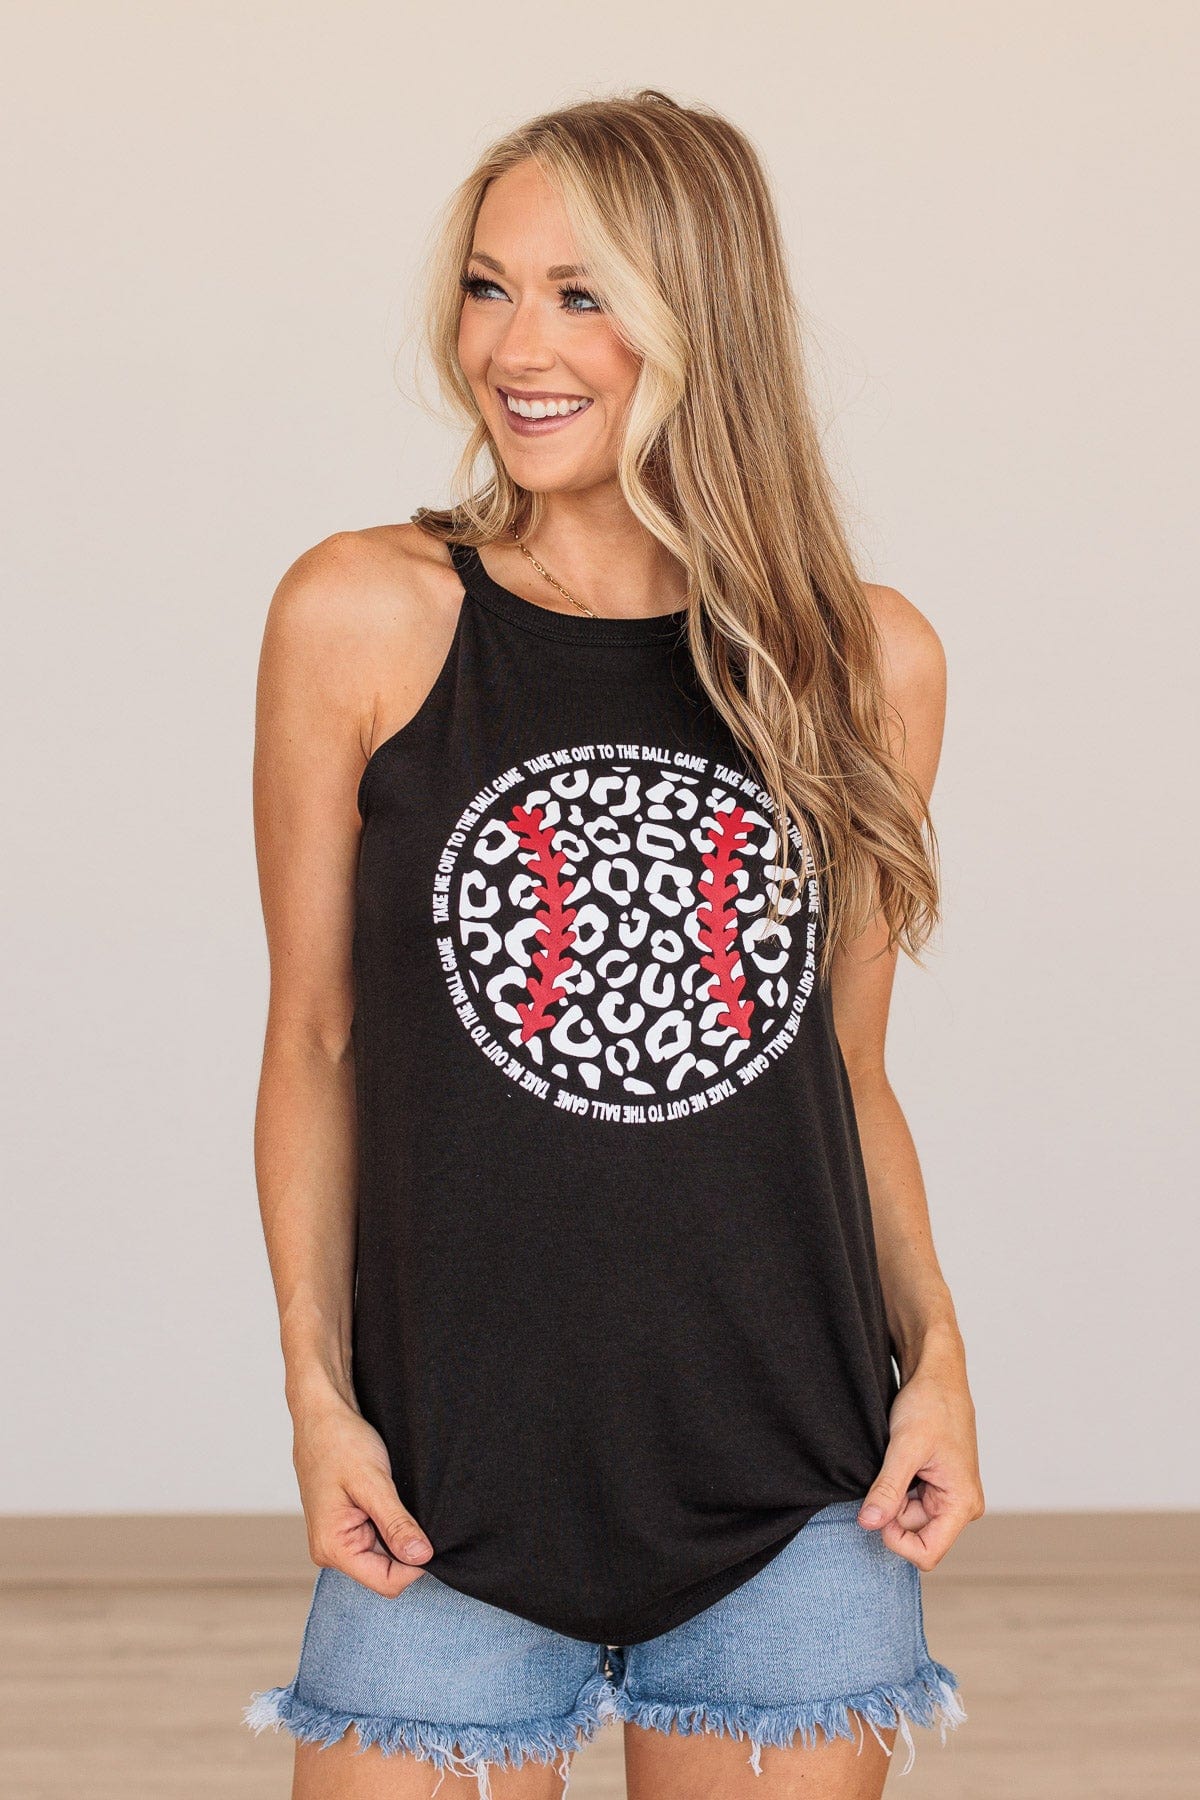 "Take Me Out To The Ball Game" Graphic Tank- Black